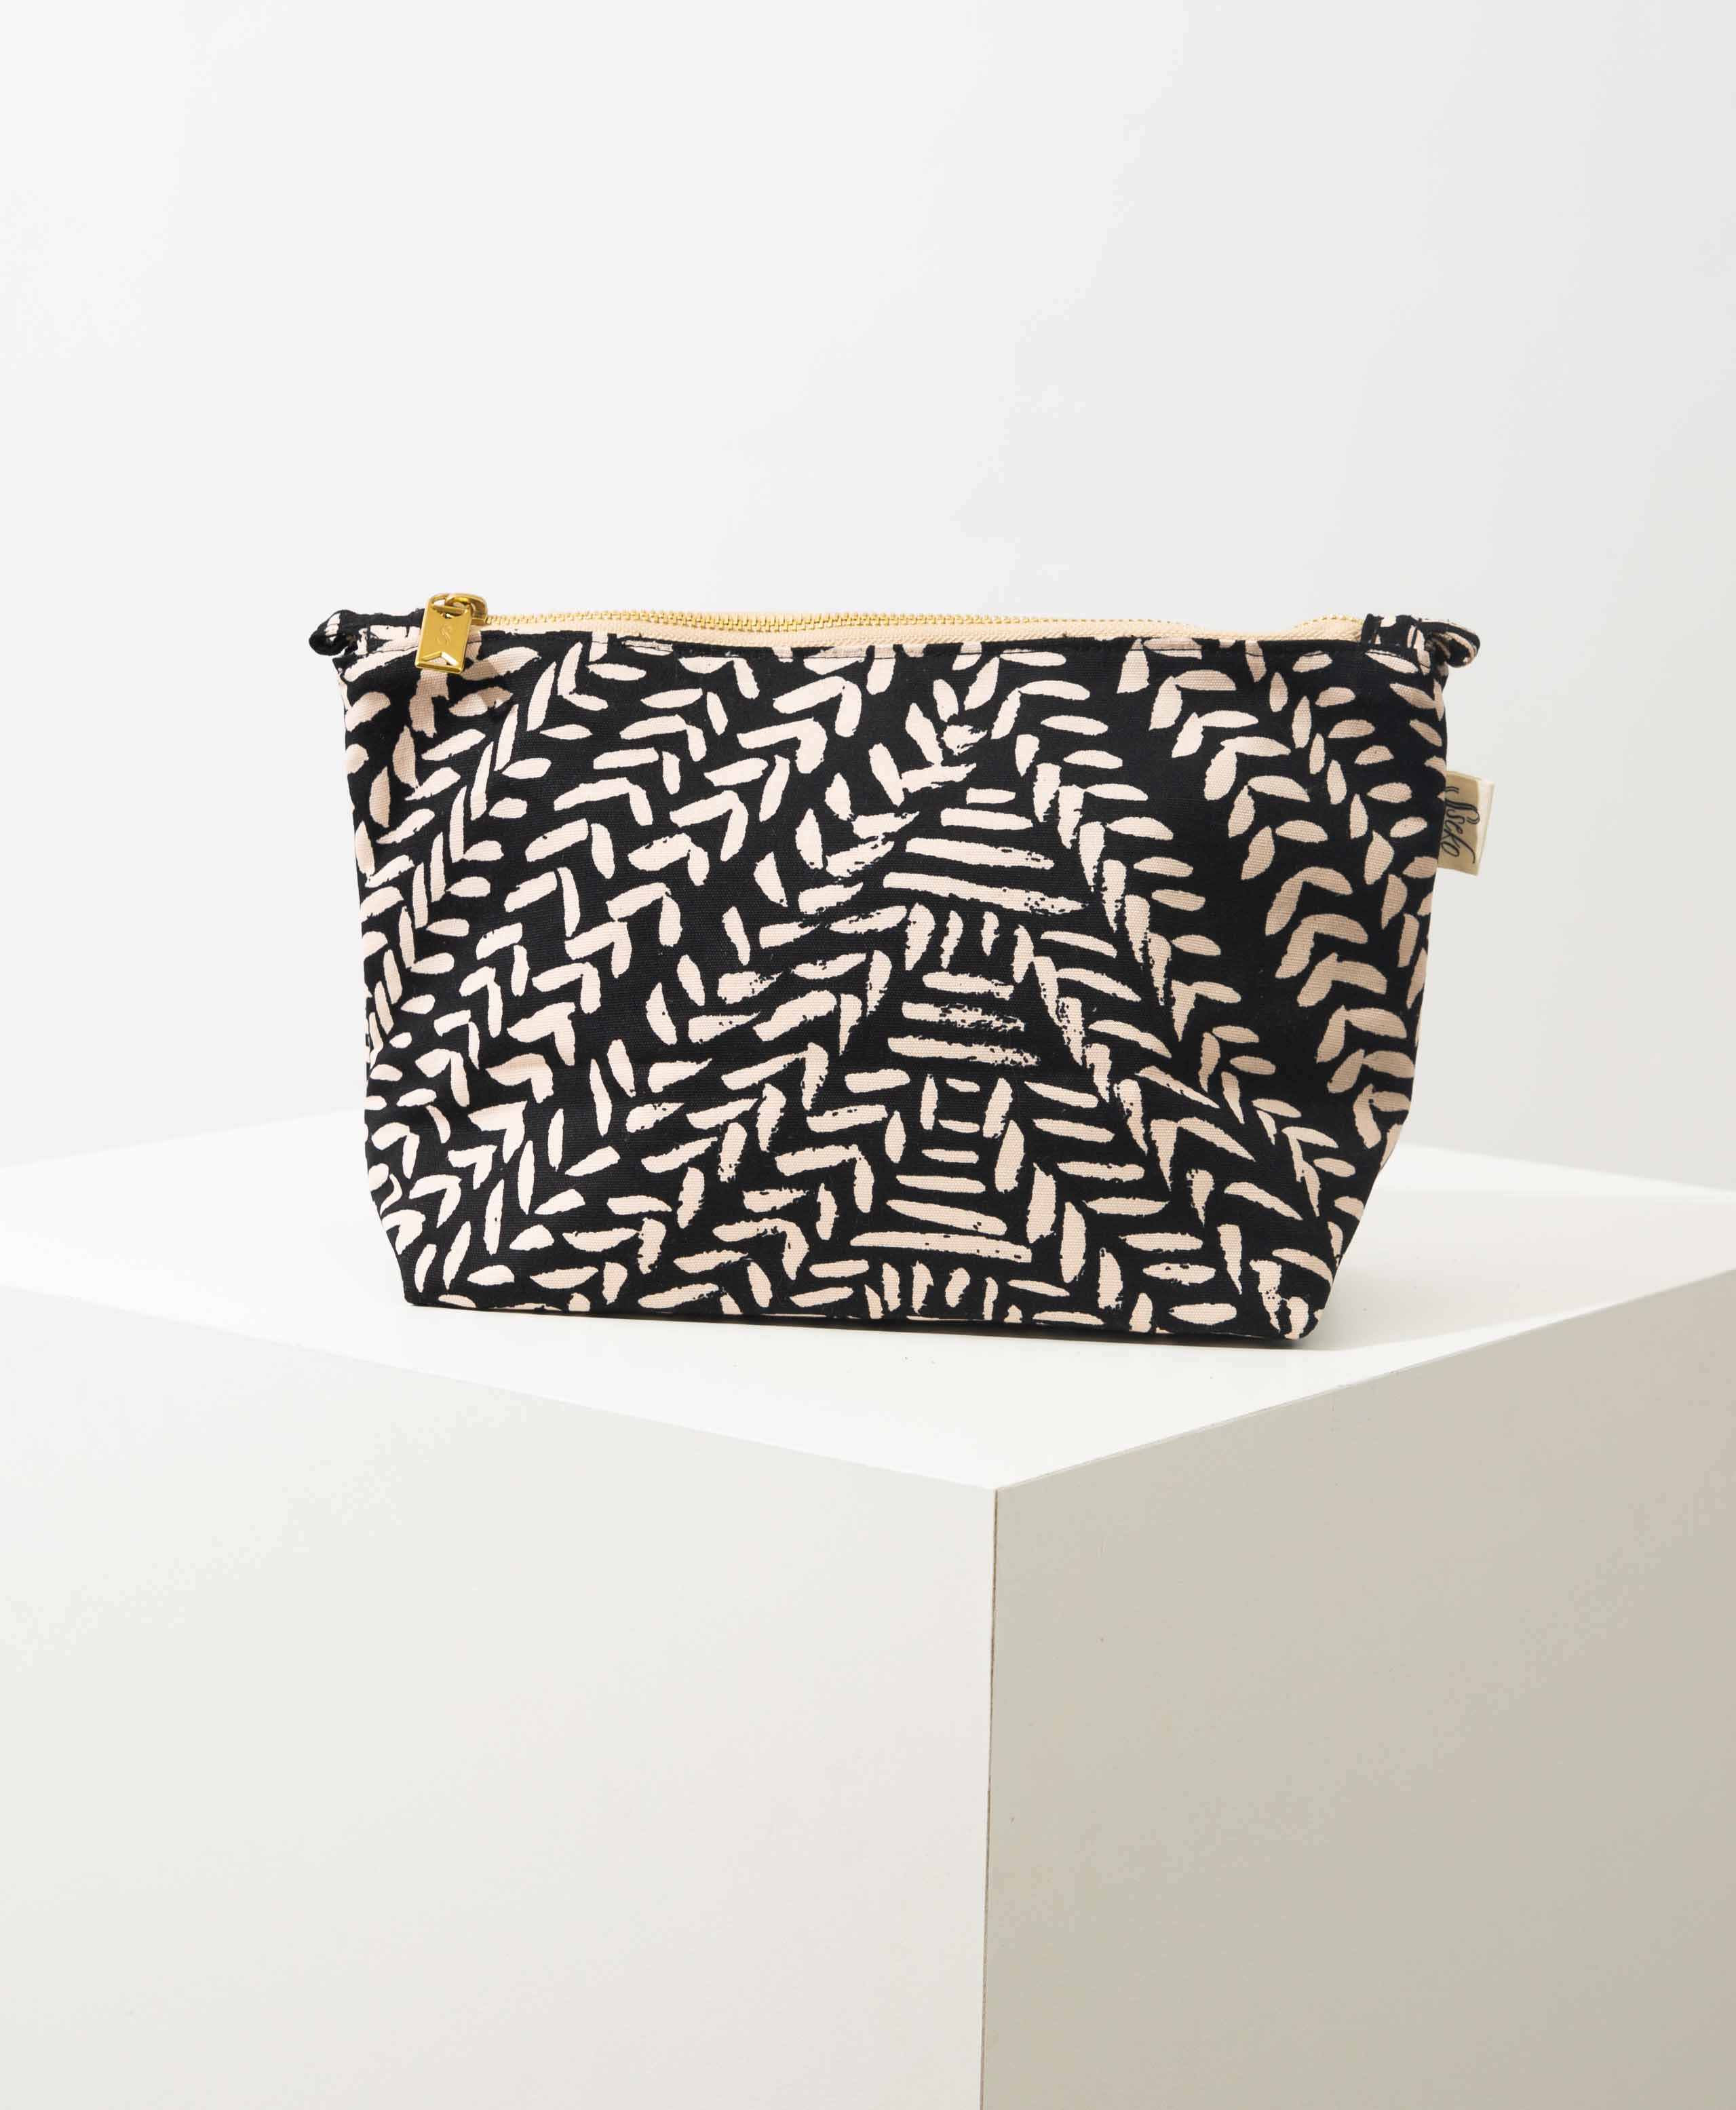 The Carryall Cosmetic Bag in Kawa print sits upright on a white block. It is roughly rectangular and is wider than it is tall. It is made of printed cotton that has a black background with white, hand-painted looking markings. There is a brass zipper along the top of the bag, and two fabric loops on either corner, allowing the bag to turn into a crossbody. 